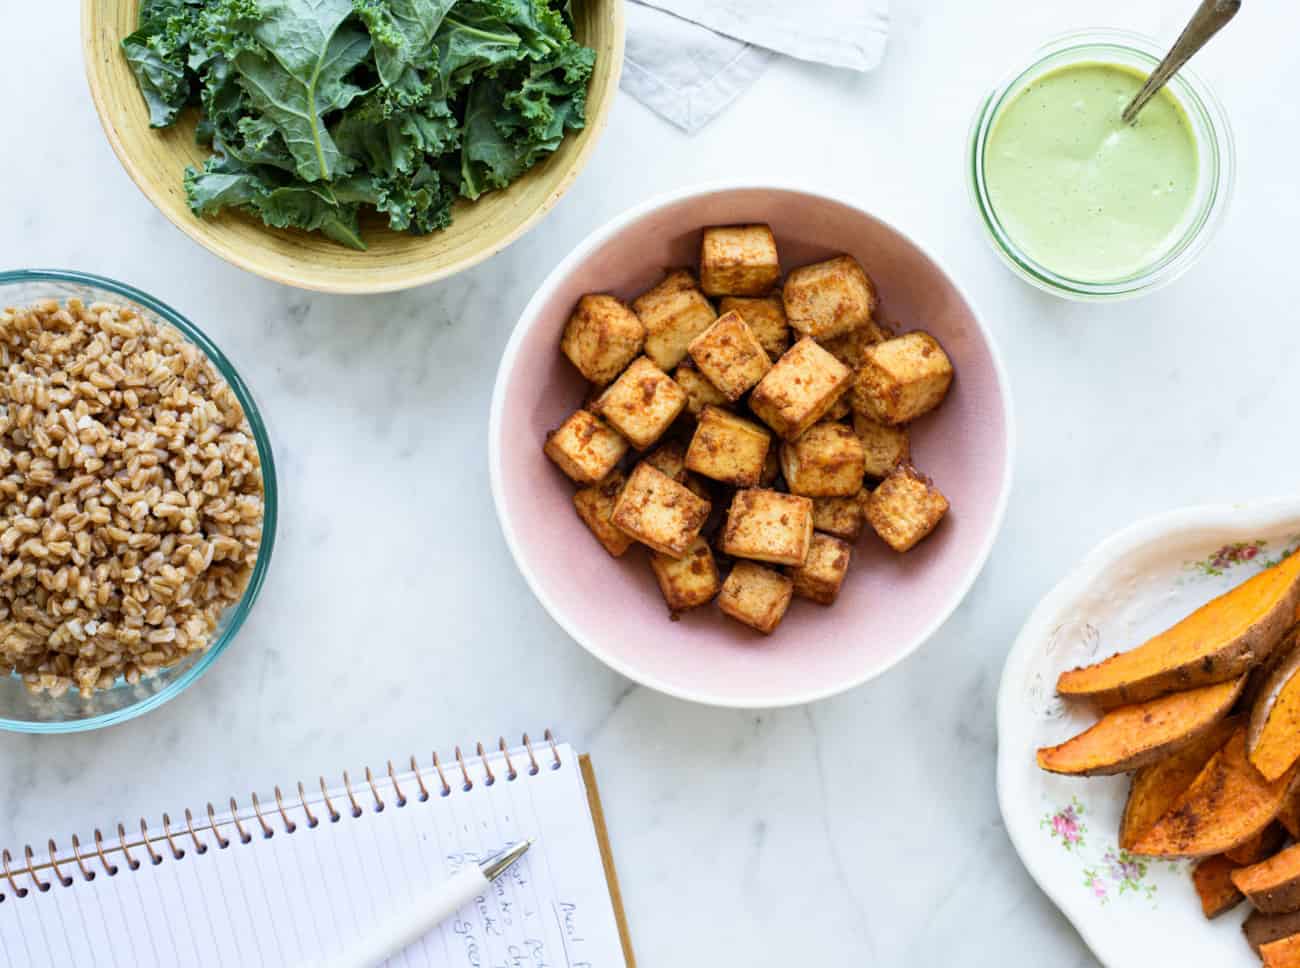 Completed plant-based meal prep: roasted sweet potatoes, baked tofu, creamy cilantro dressing, and farro, laid out on a marble table next to a notebook